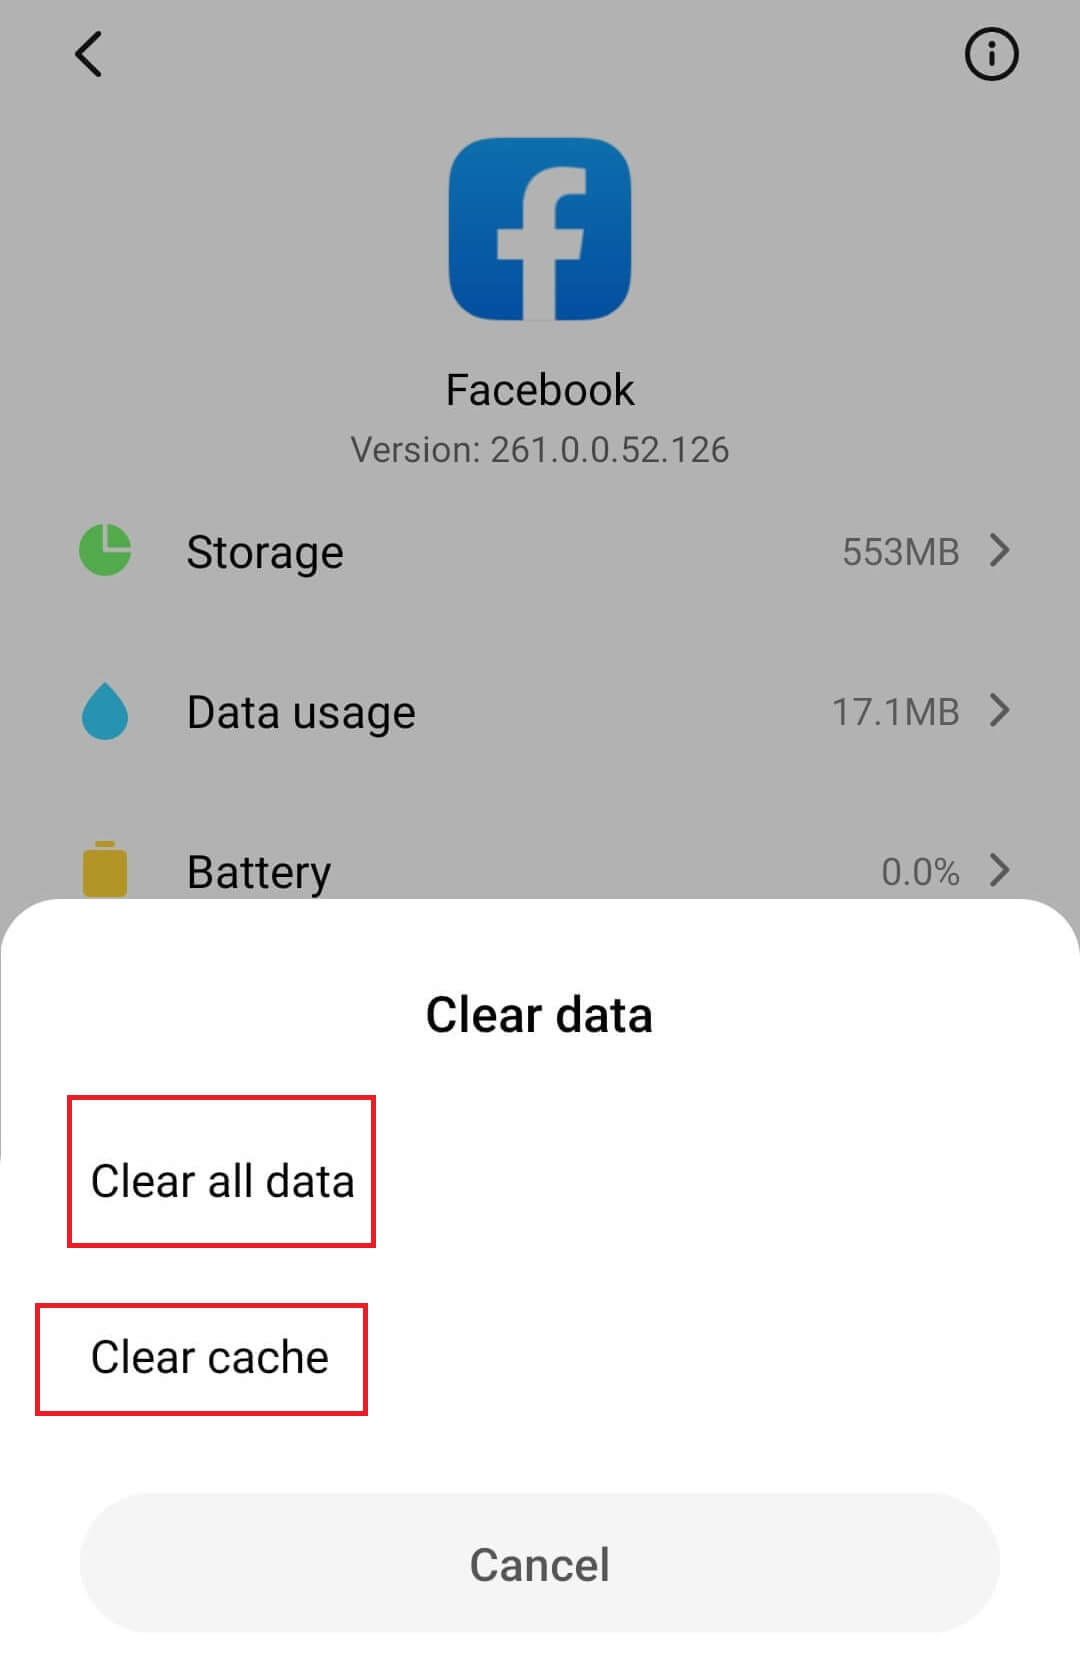 Clear catch and Data